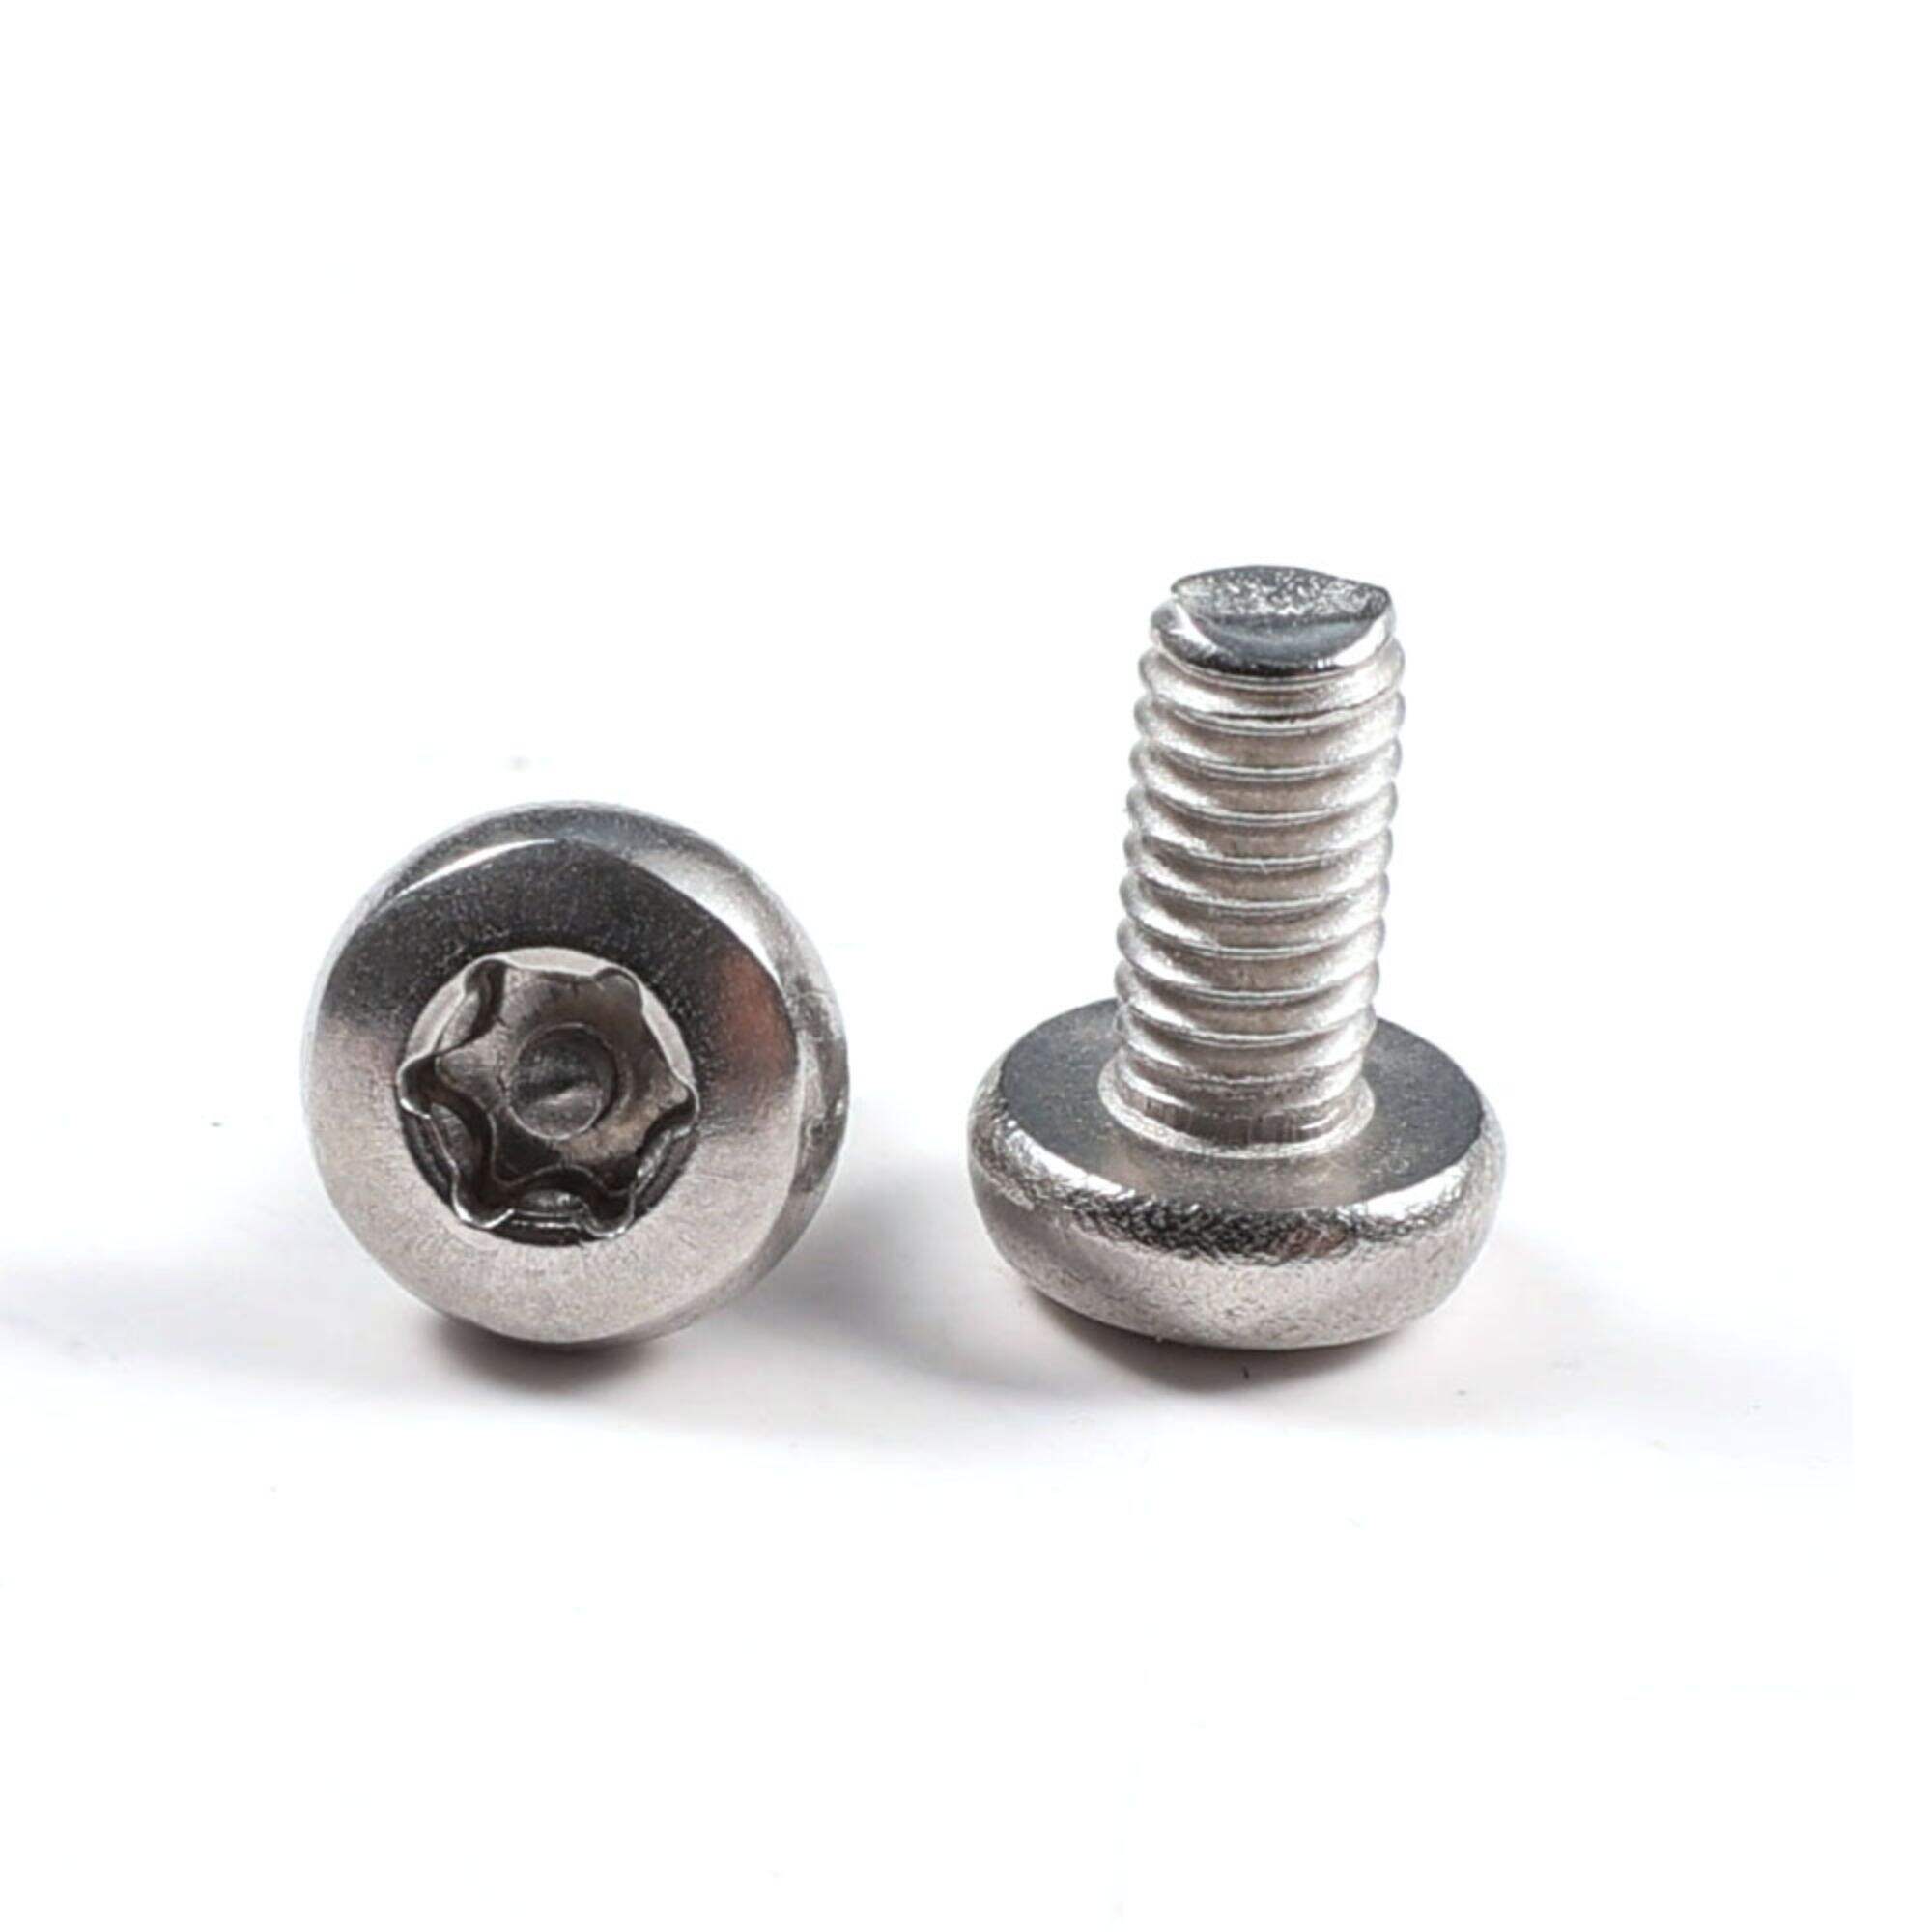 Stainless Steel Button Head Tamper Resistant Half Thread Triangle Socket Security Screw